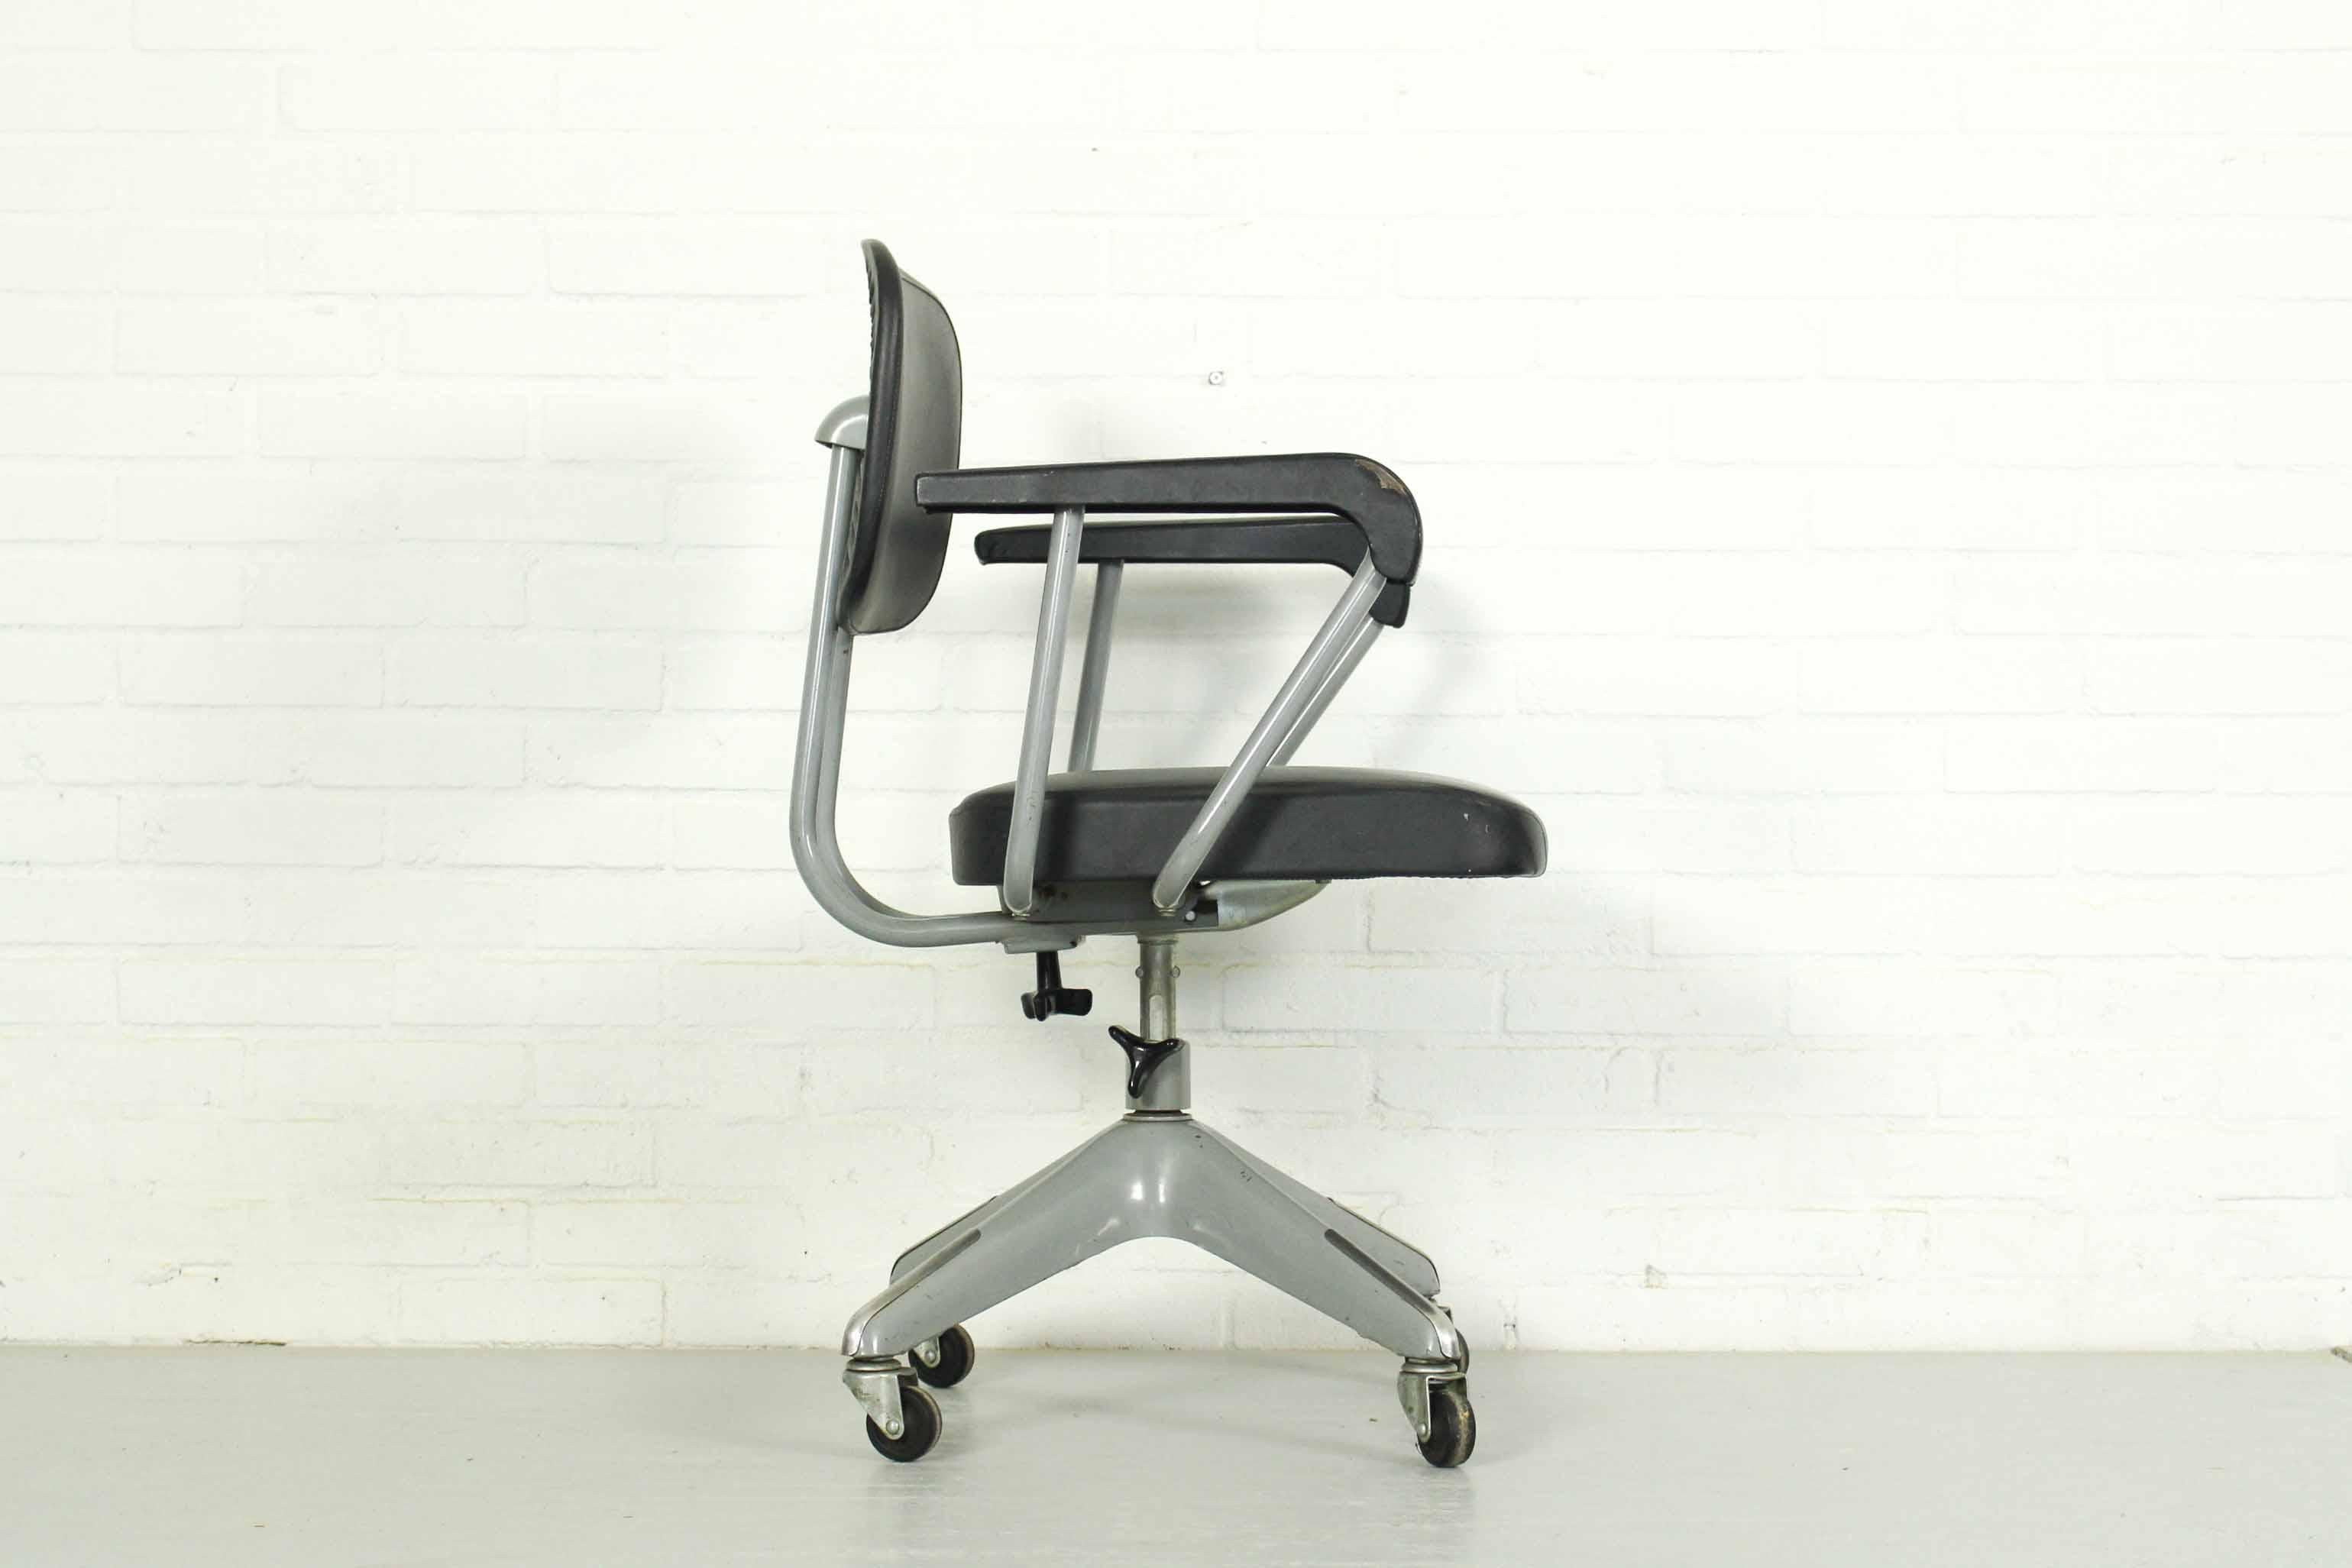 Office chair manufactured in Tokyo by Okamura arount 1970. Iconic model desk chair and quite hard to find. 

Dimensios: 81cm H, 55cm W, 52cm D. 
   